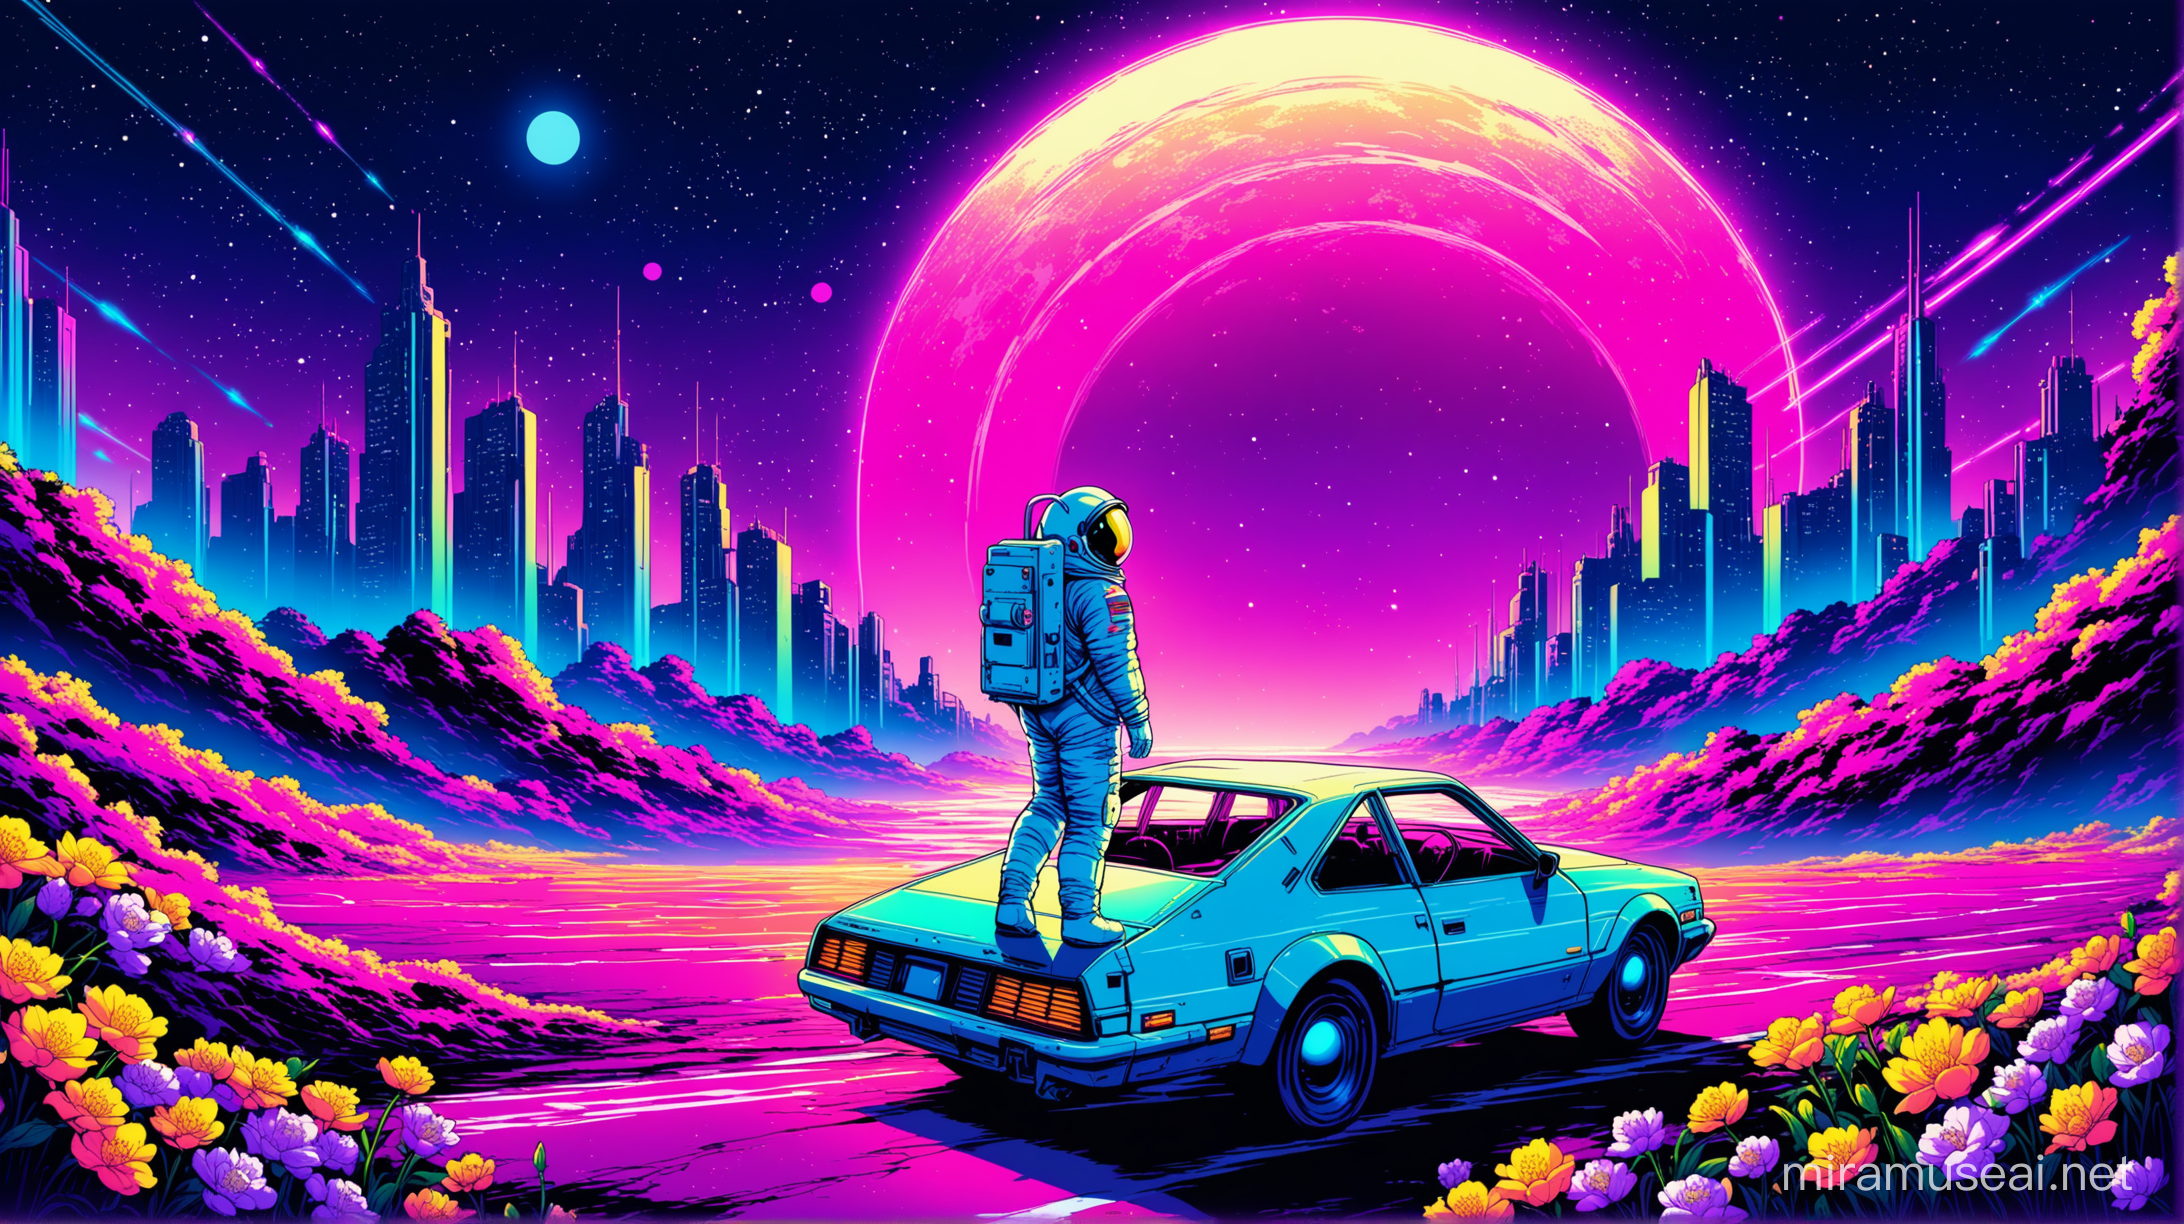 Nostalgic Synthwave Space Drive Amidst Spring Flowers